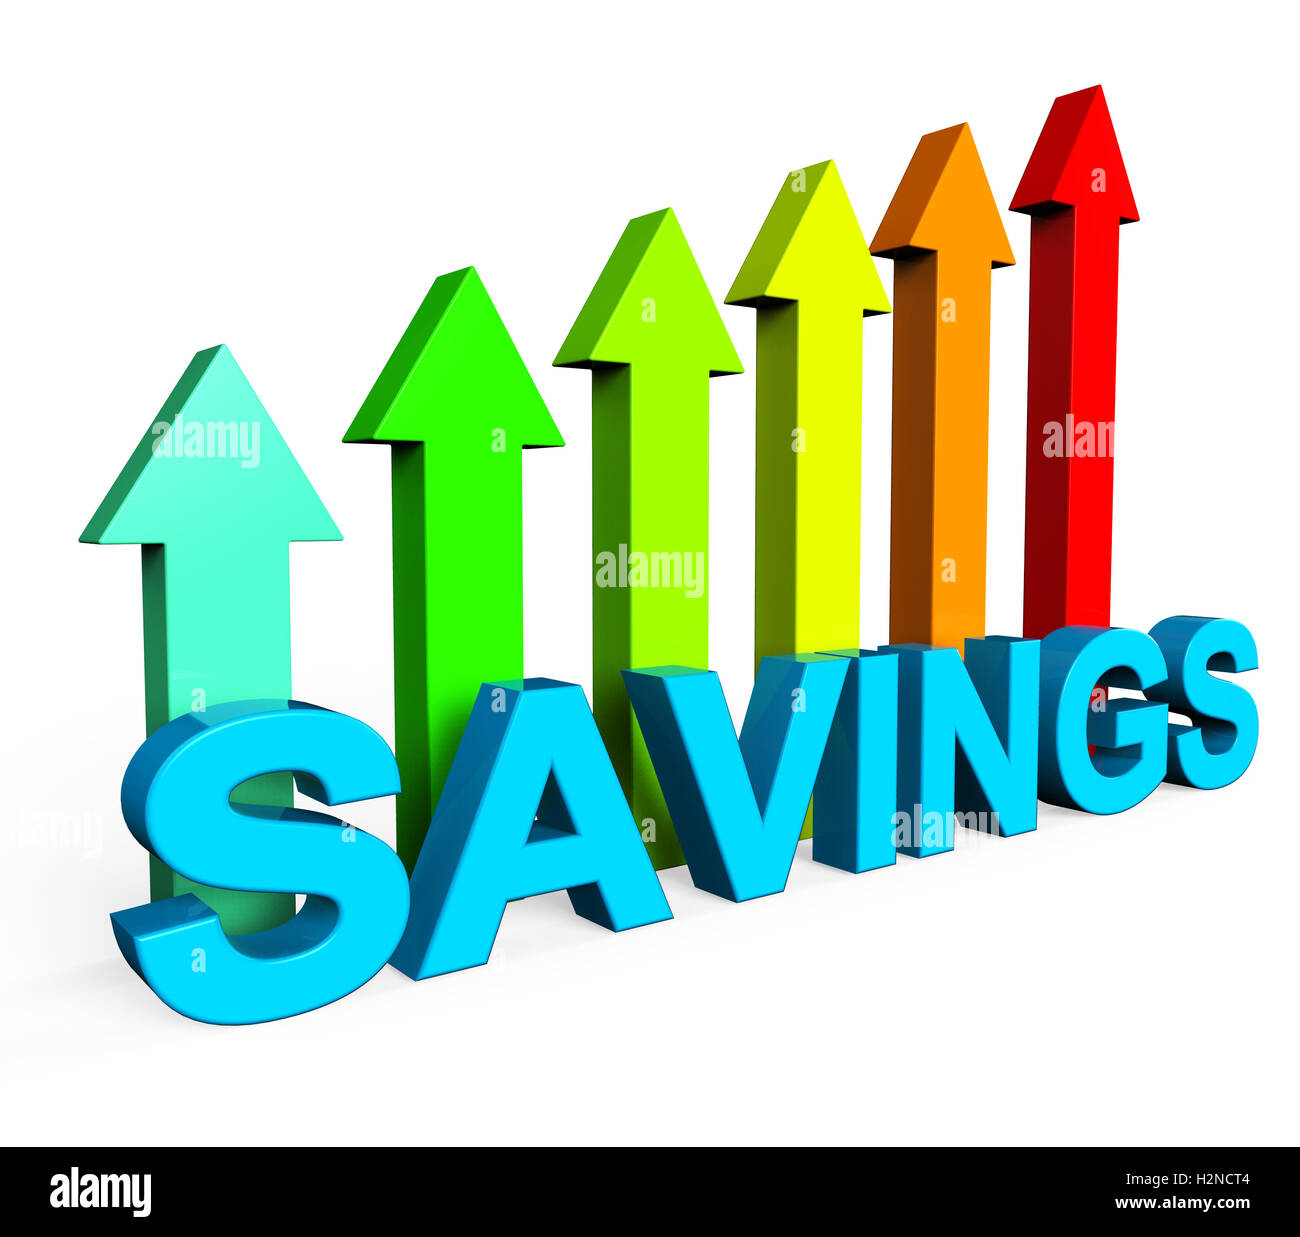 Savings Increasing Showing Financial Report And Graphs Stock Photo